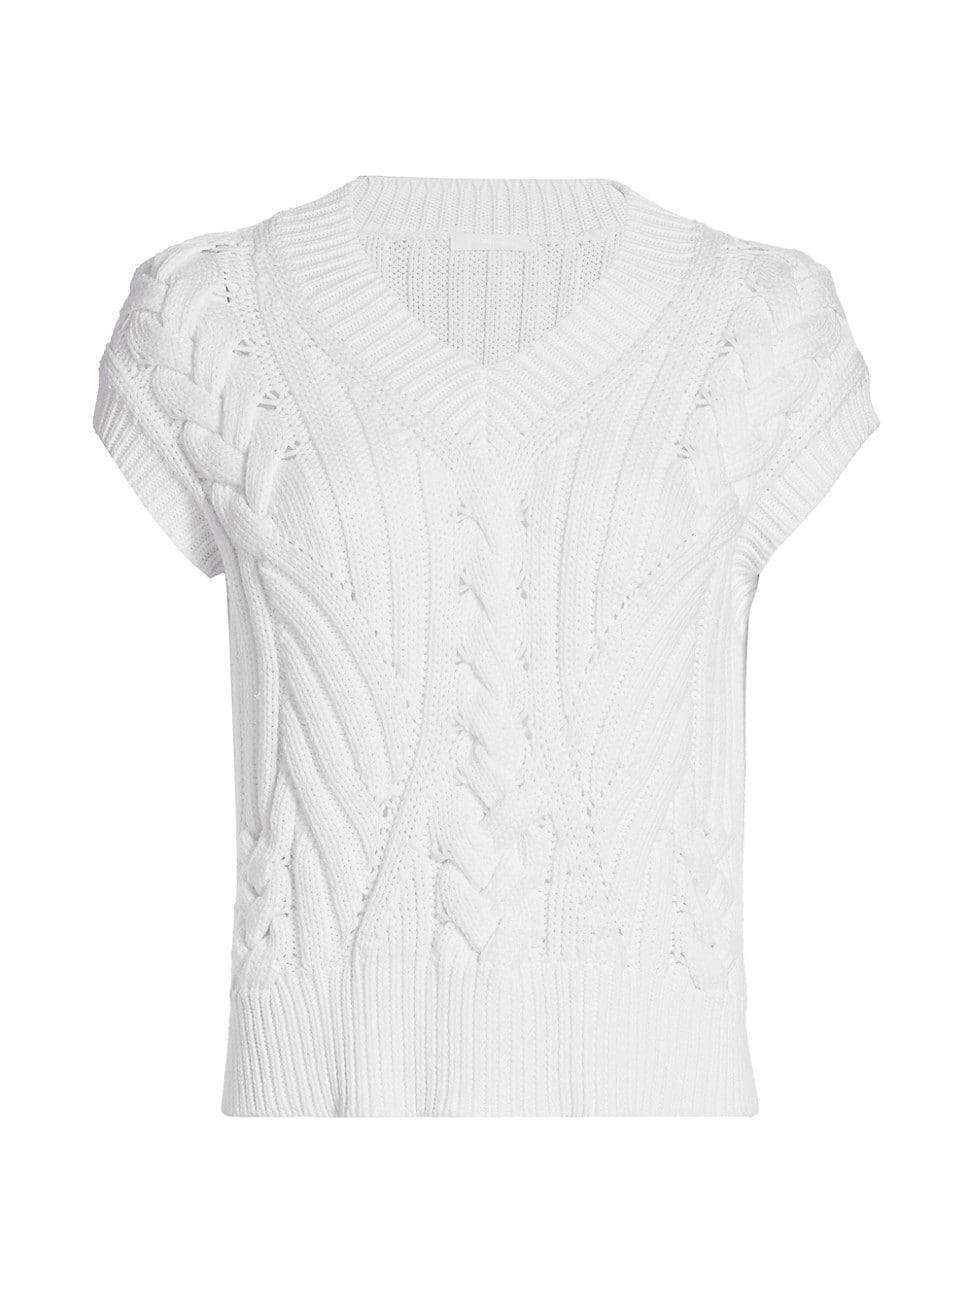 Helmut Lang Beverly Cable-knit Sweater in White | Lyst